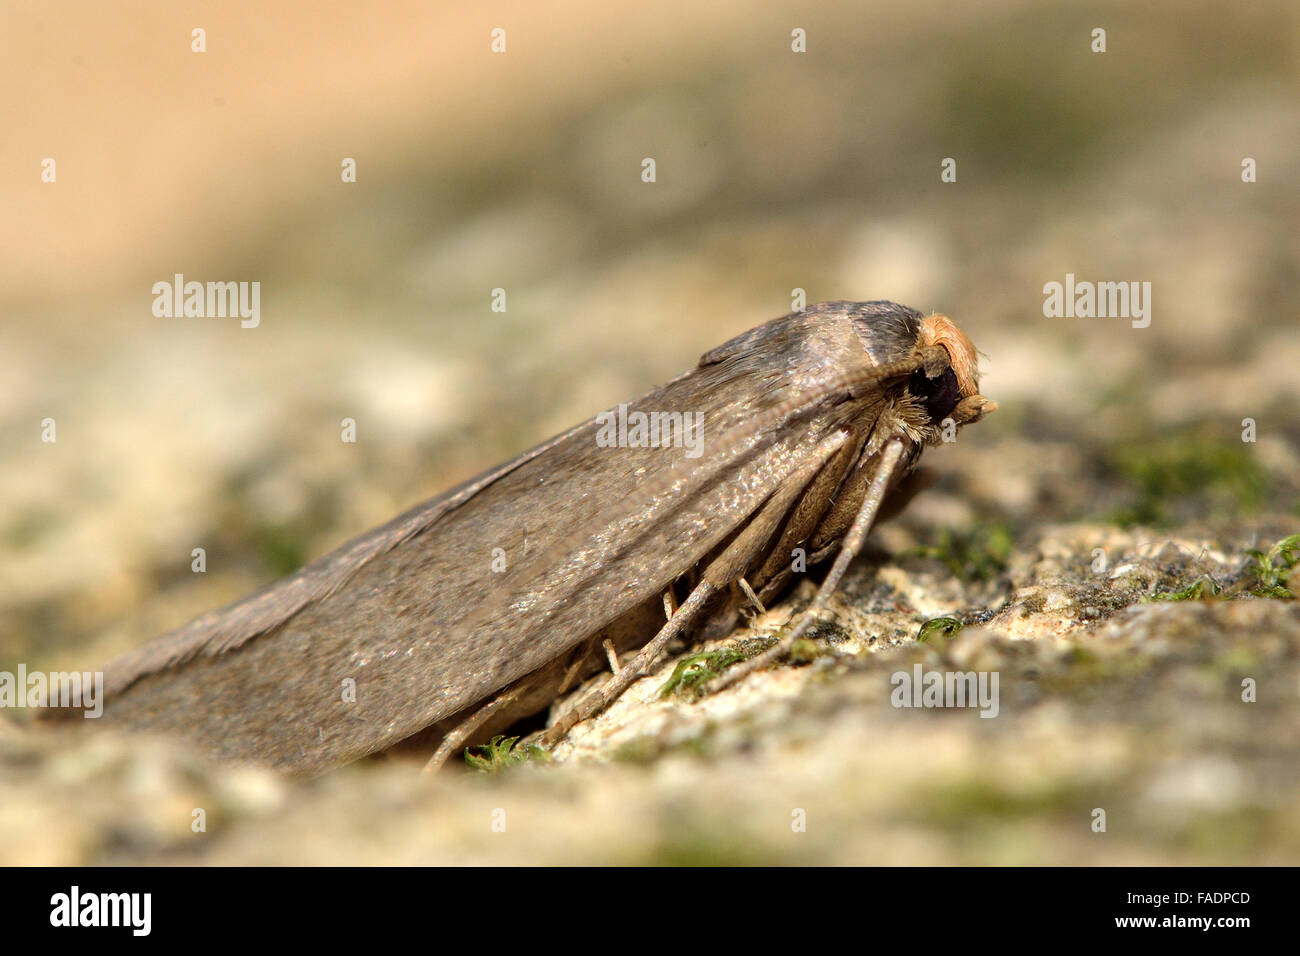 Lesser wax moth (Achroia grisella). A distinctive moth in family Pyralidae, shown in profile at rest Stock Photo